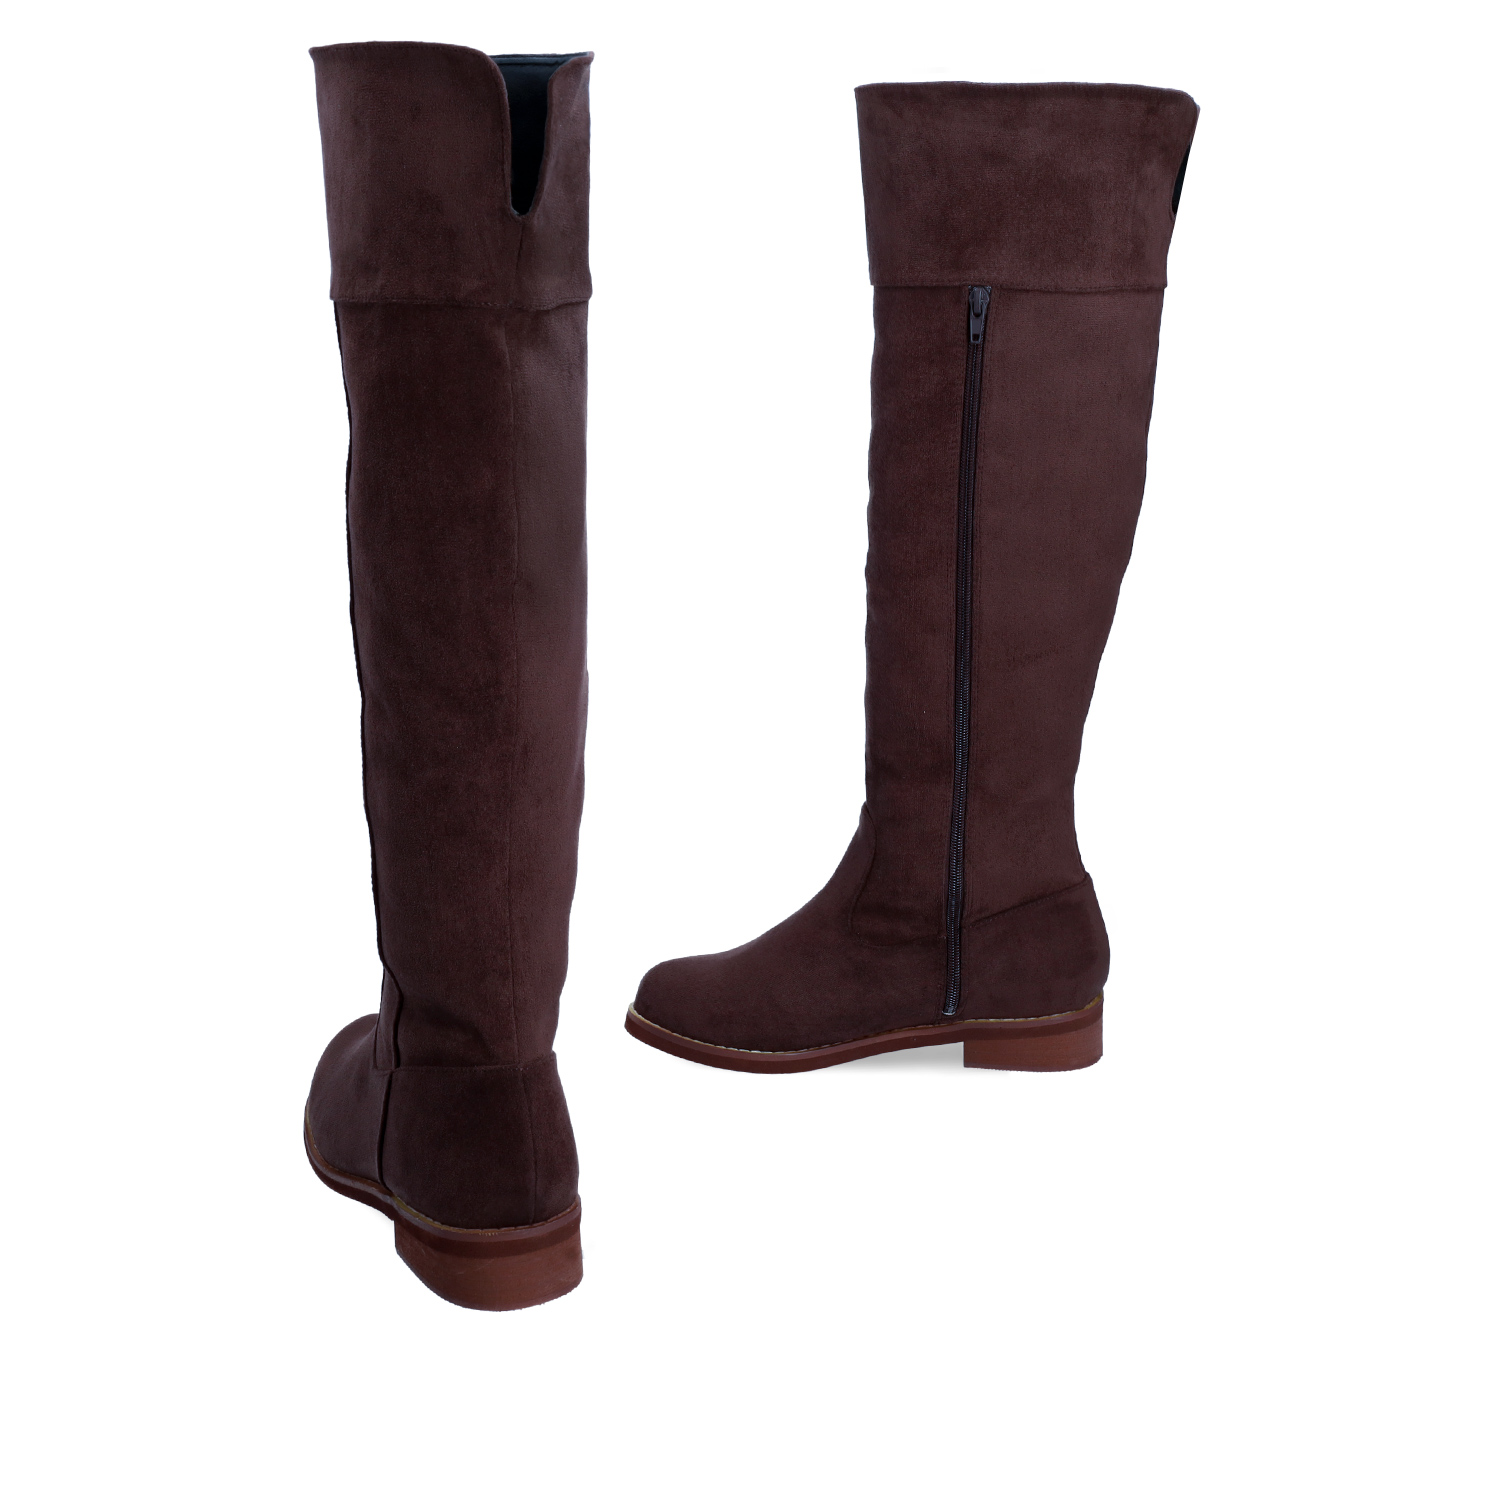 Flat knee-high boots in brown faux suede 